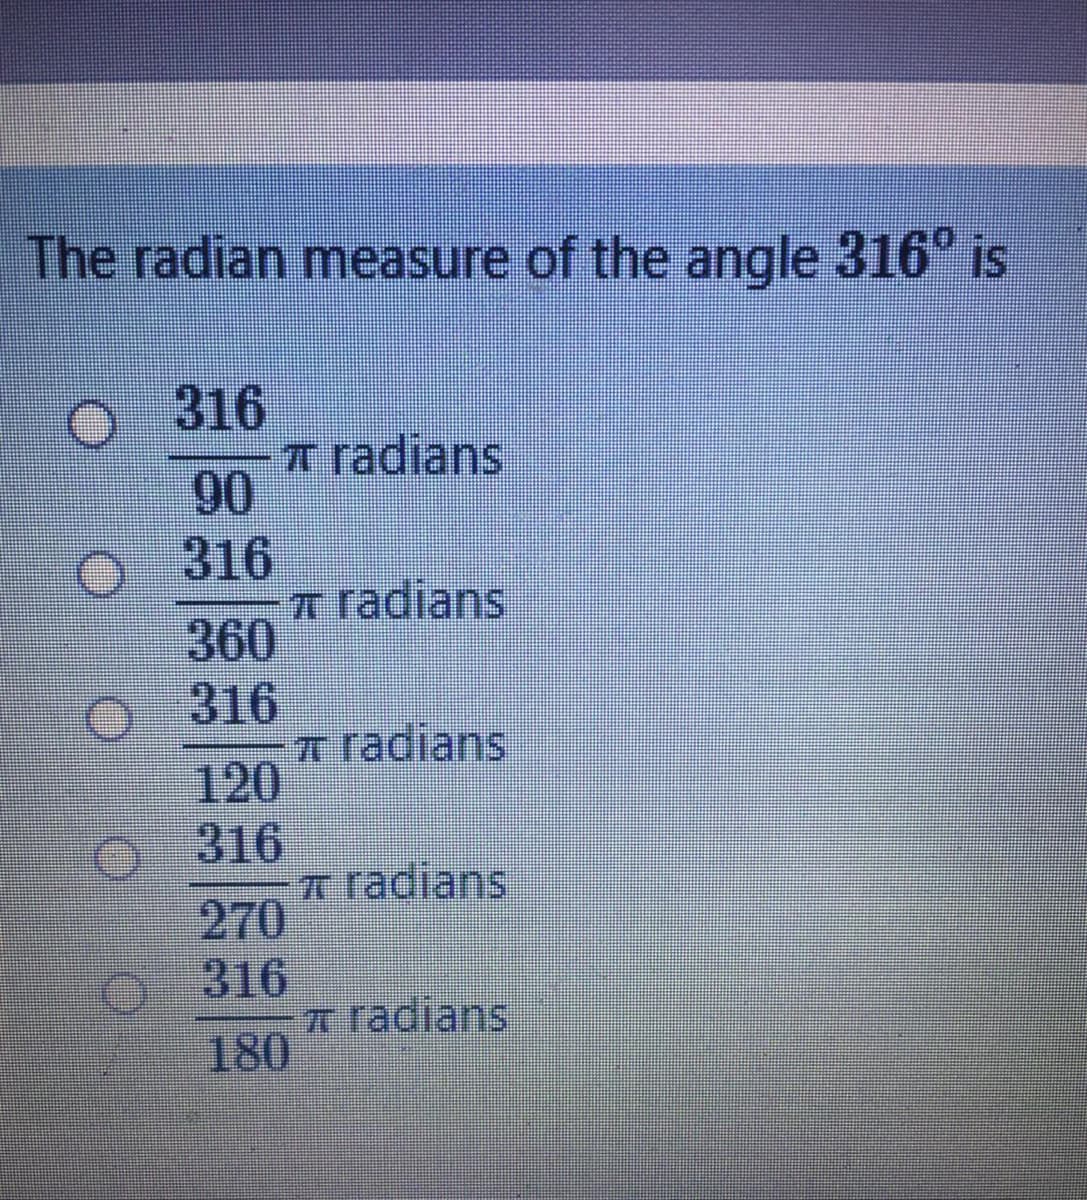 The radian measure of the angle 316° is
316
T radians
90
316
A radians
360
316
n radians
120
316
a radians
270
316
A radians
180
